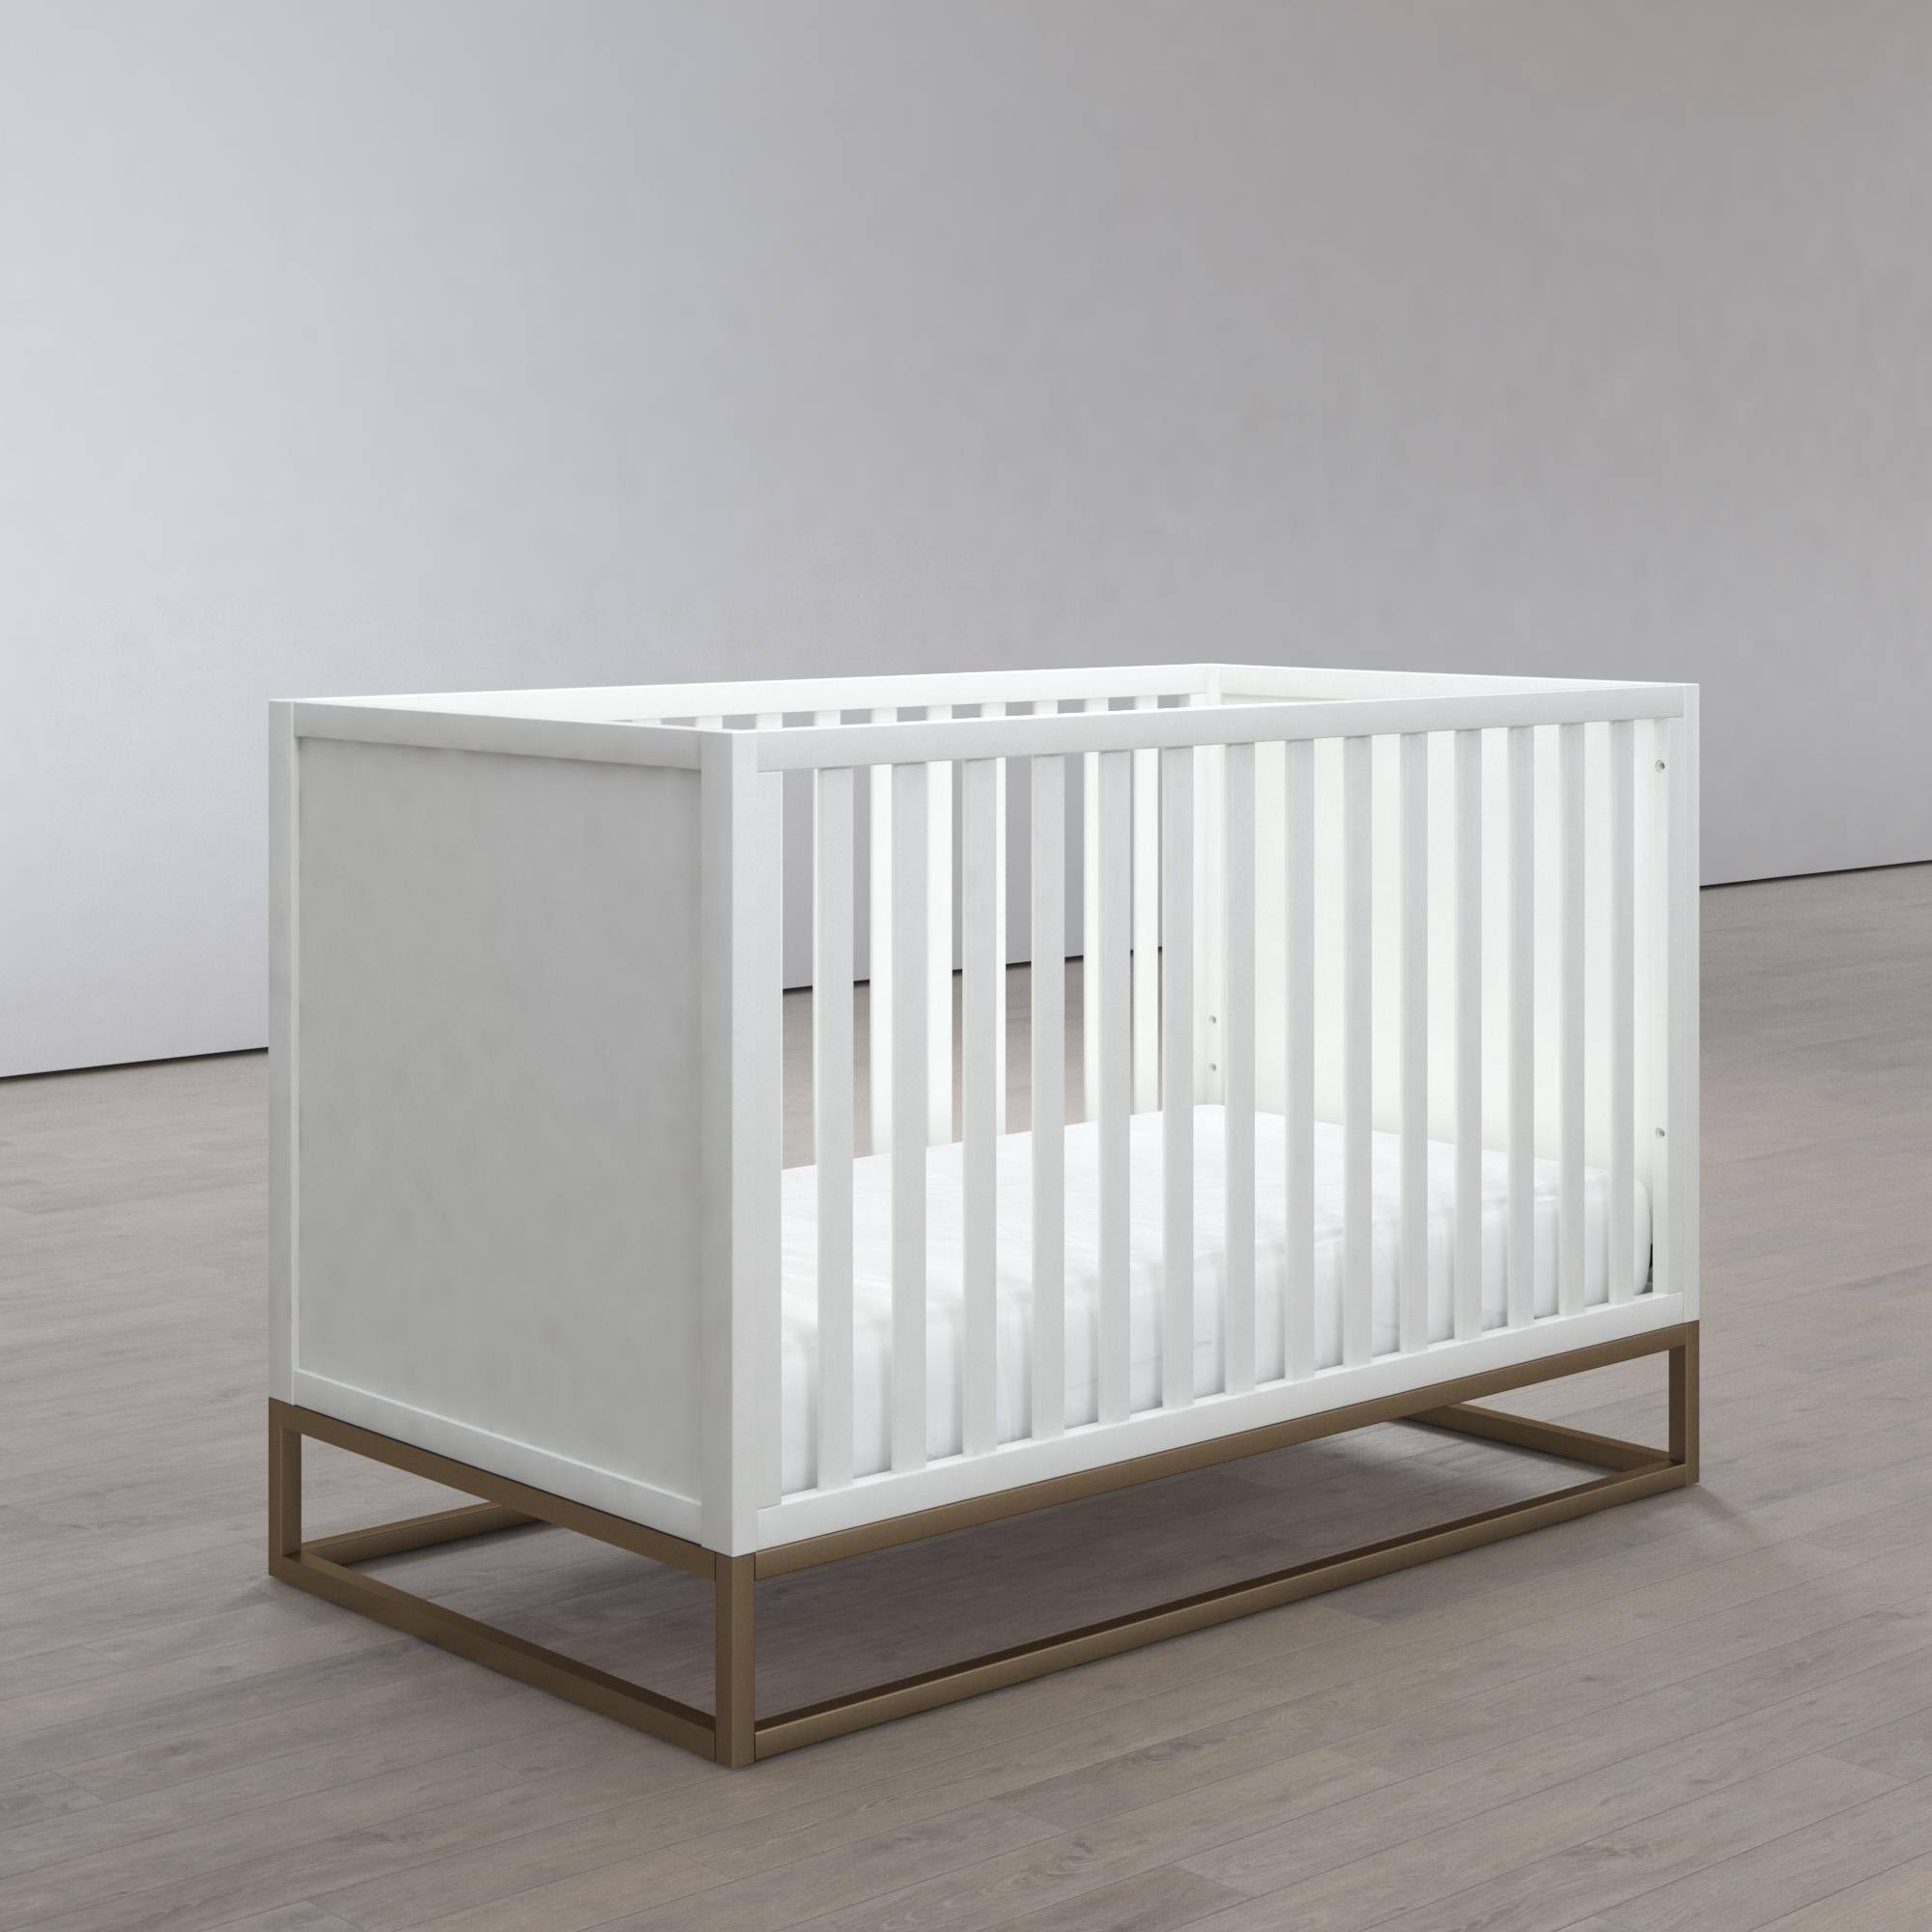 High Quality Solid Wood Multifunctional 4 in 1 Convertible Crib (2).jpg